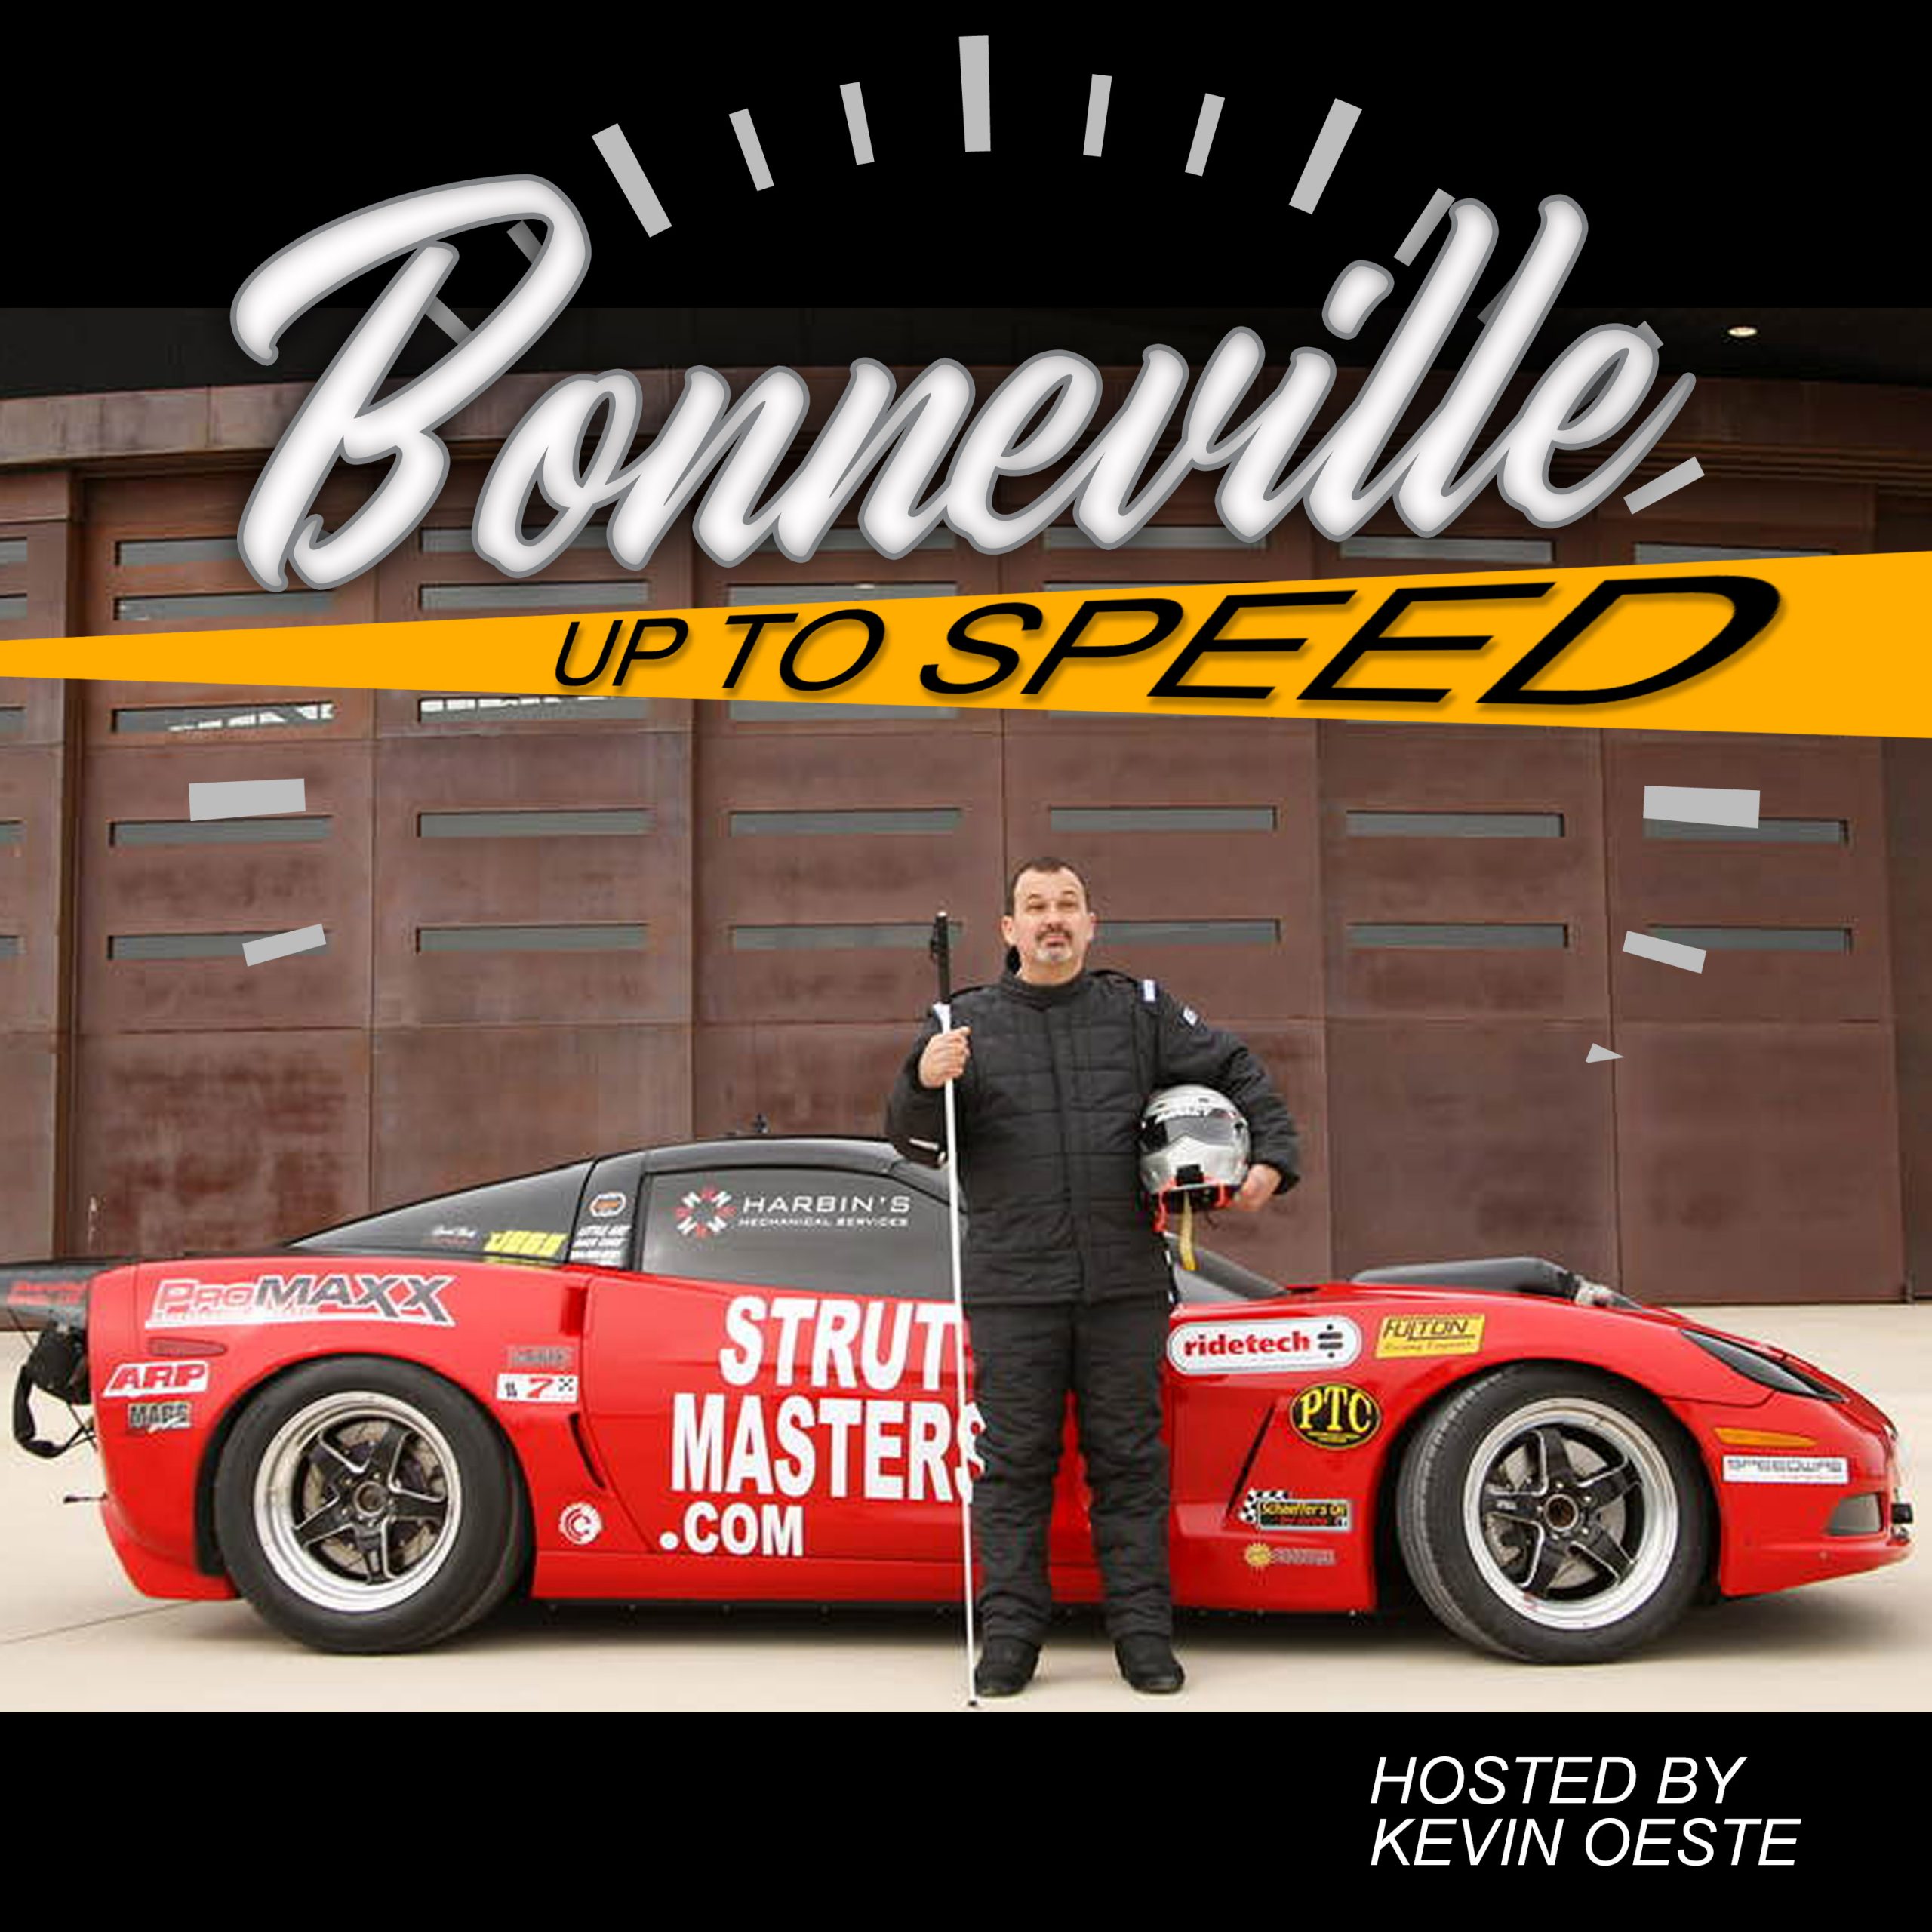 Flying Blind With Dan Parker, the World's Fastest Blind Man on the Bonneville Up To Speed Podcast